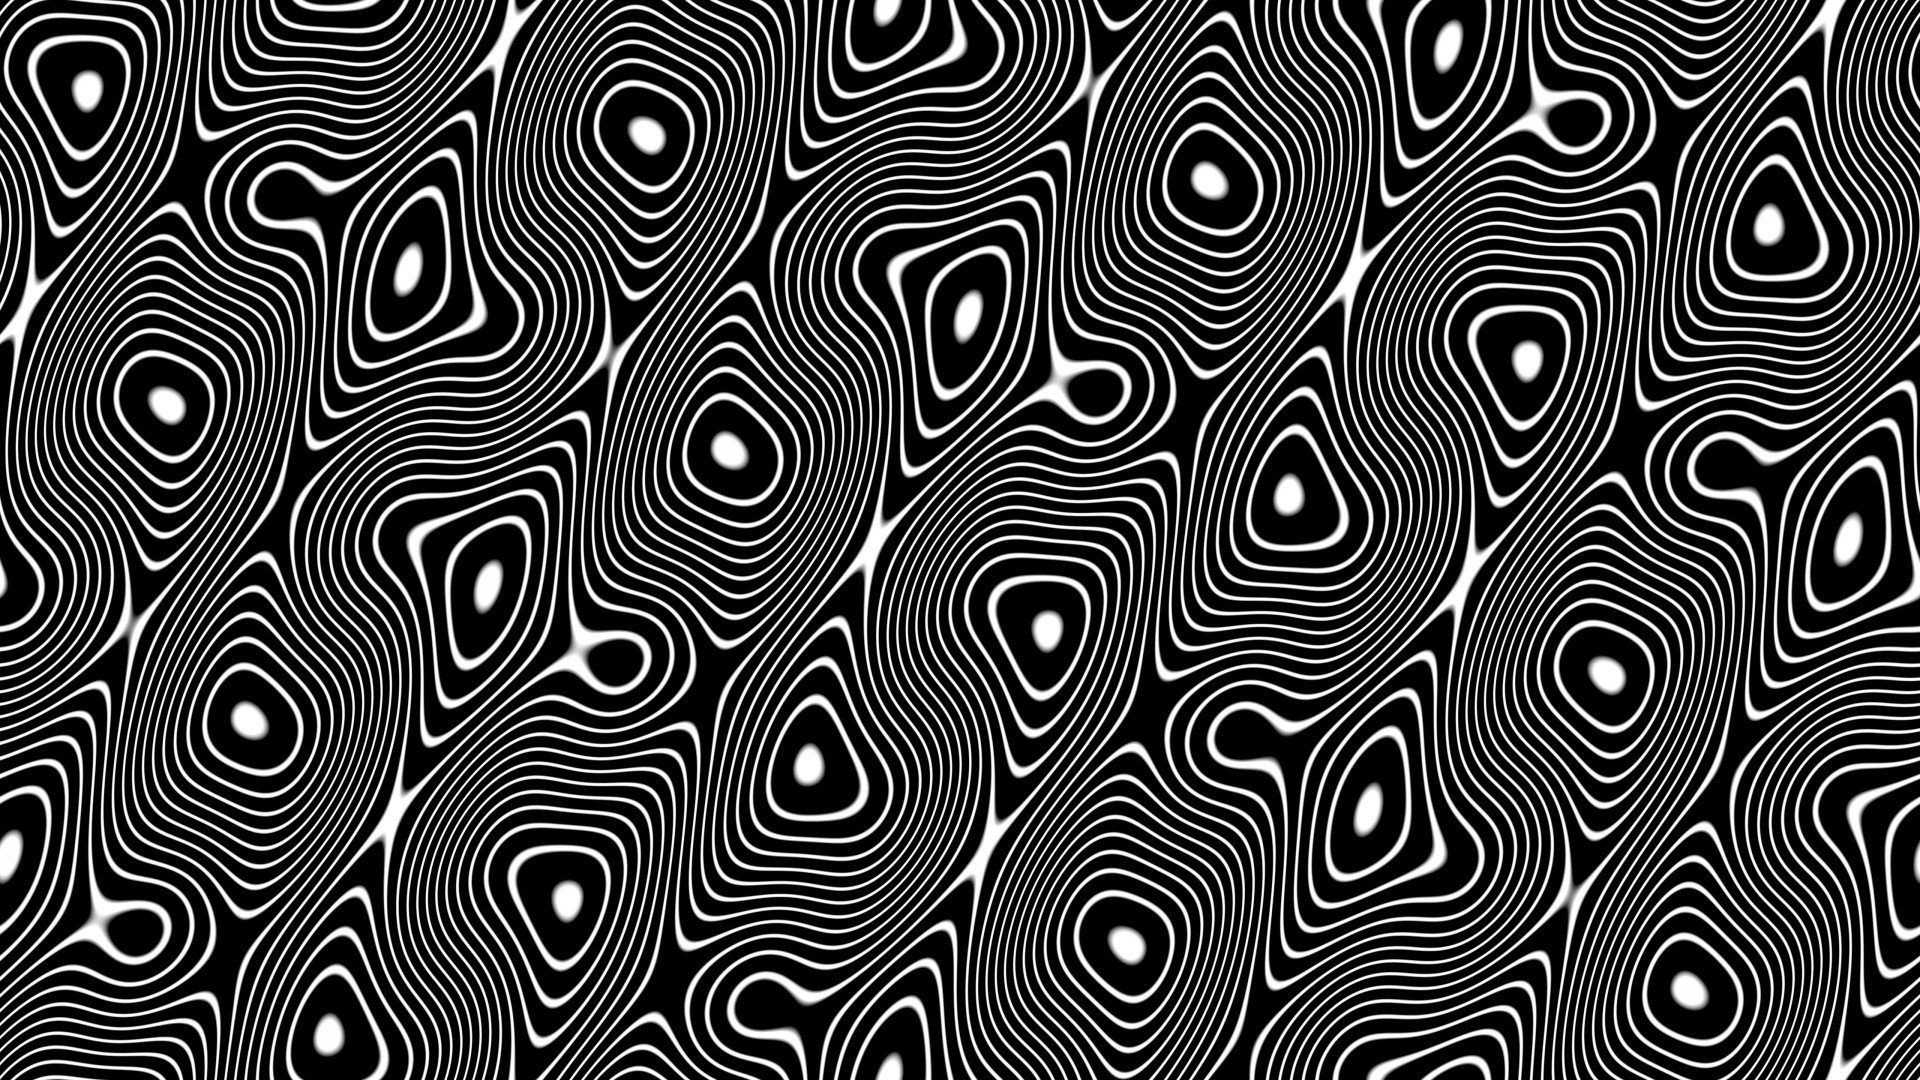 Patterns Black and White Black and White Pattern Background Free Stock